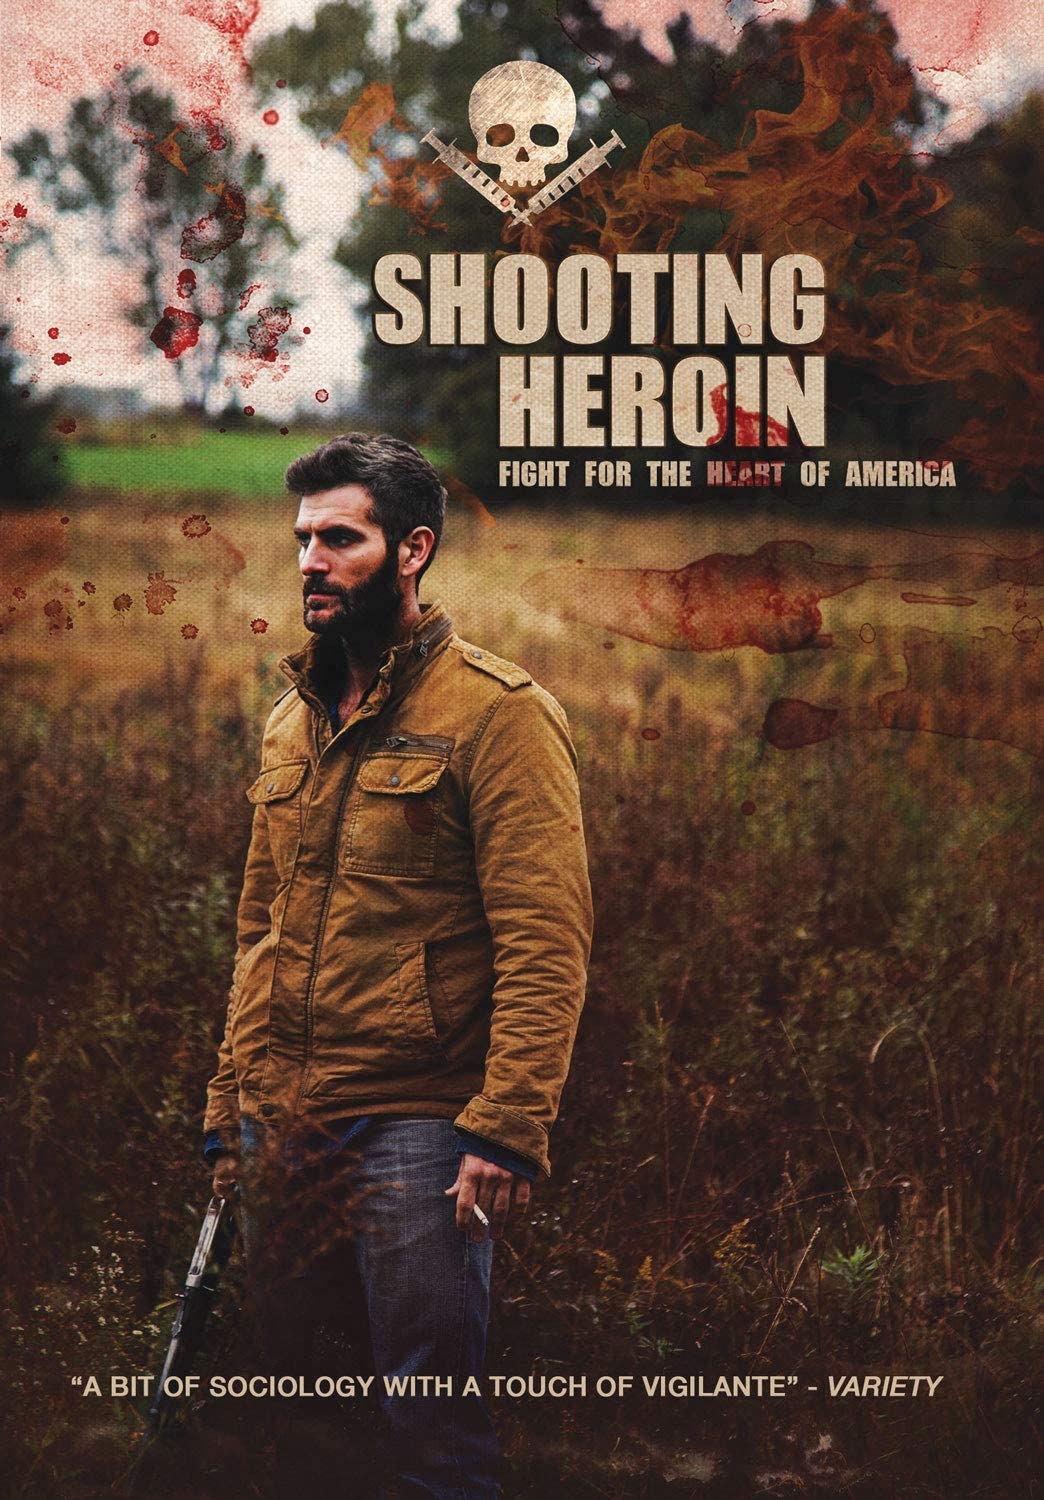 Shooting Heroin (Special Edition) (Blu-ray) on MovieShack